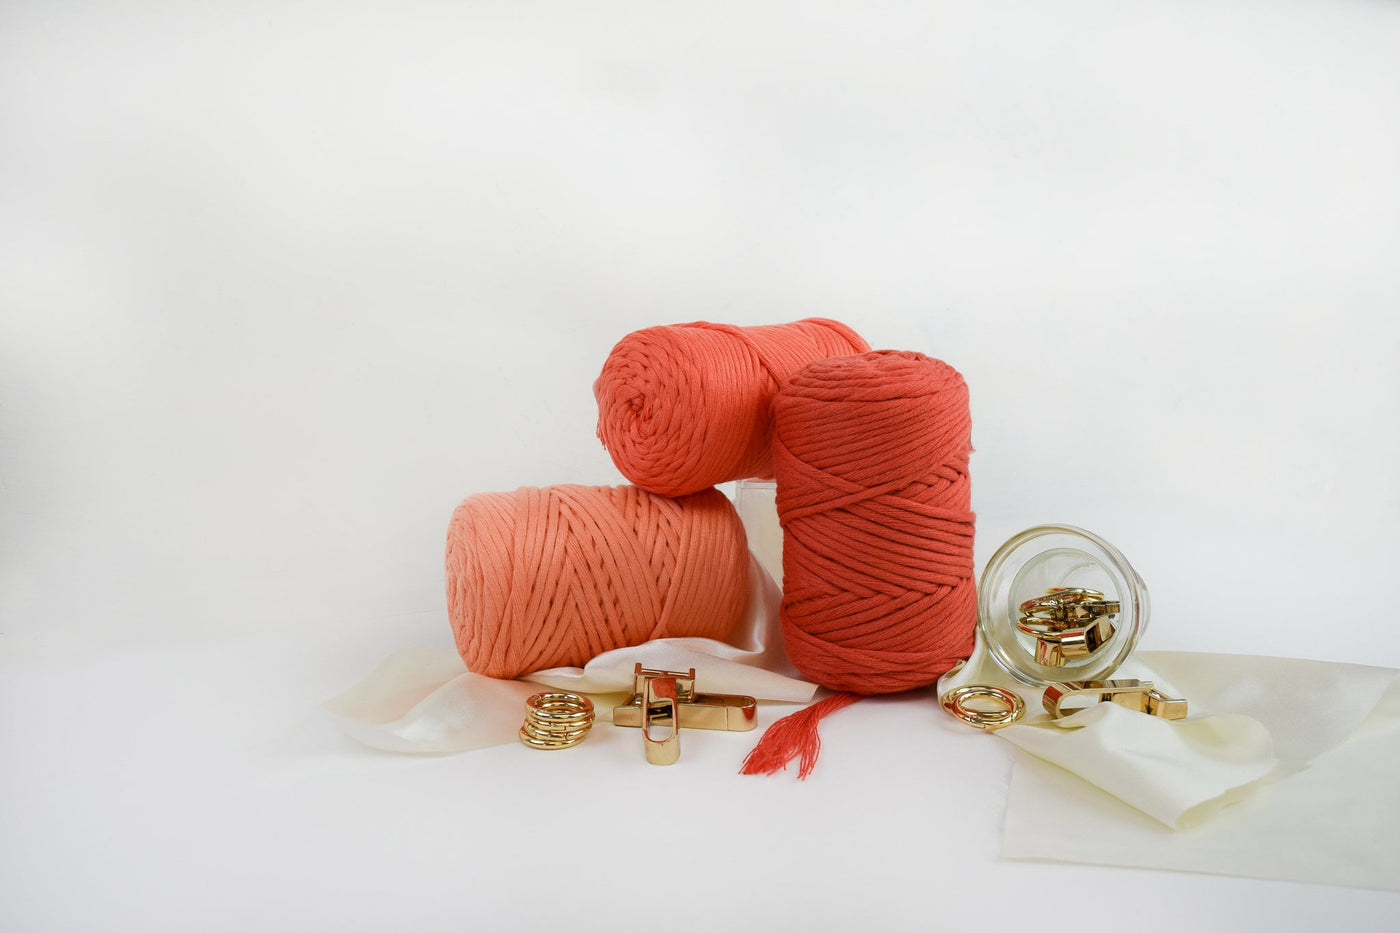 COTTON - VISCOSE ROLL 4 MM - SALMON COLOR | LIMITED EDITION